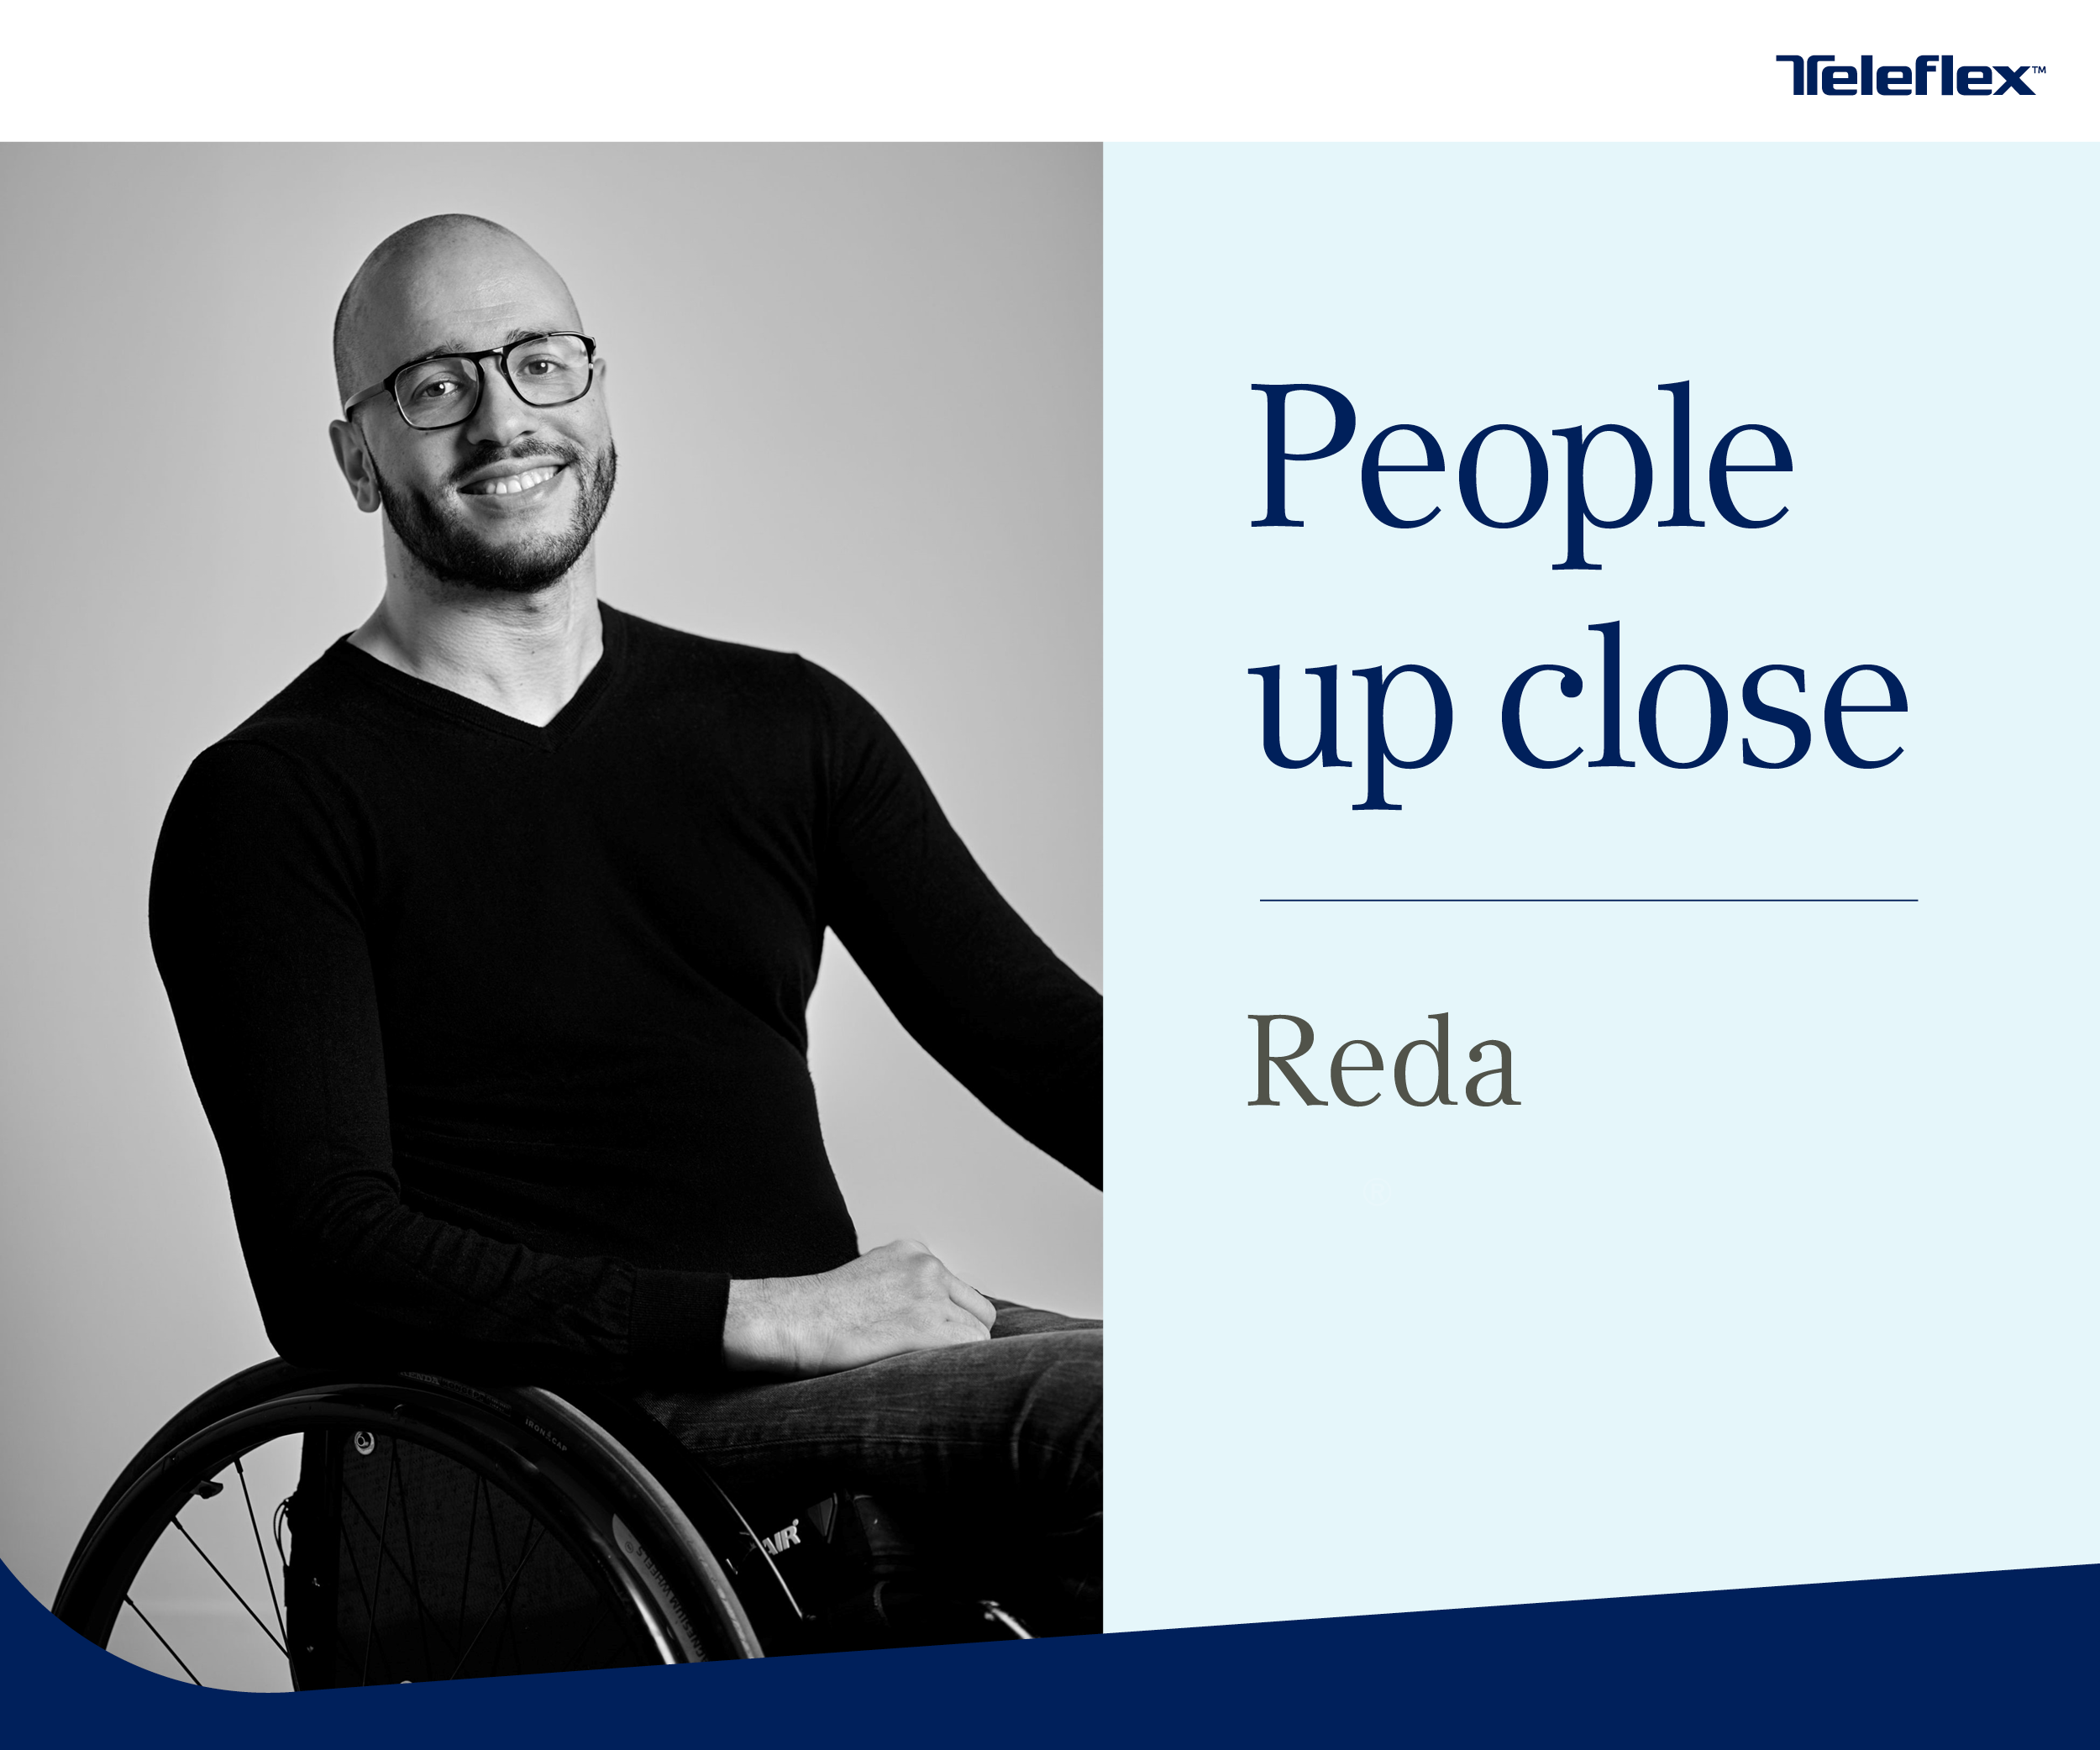 Teleflex for active living: people up close – Reda